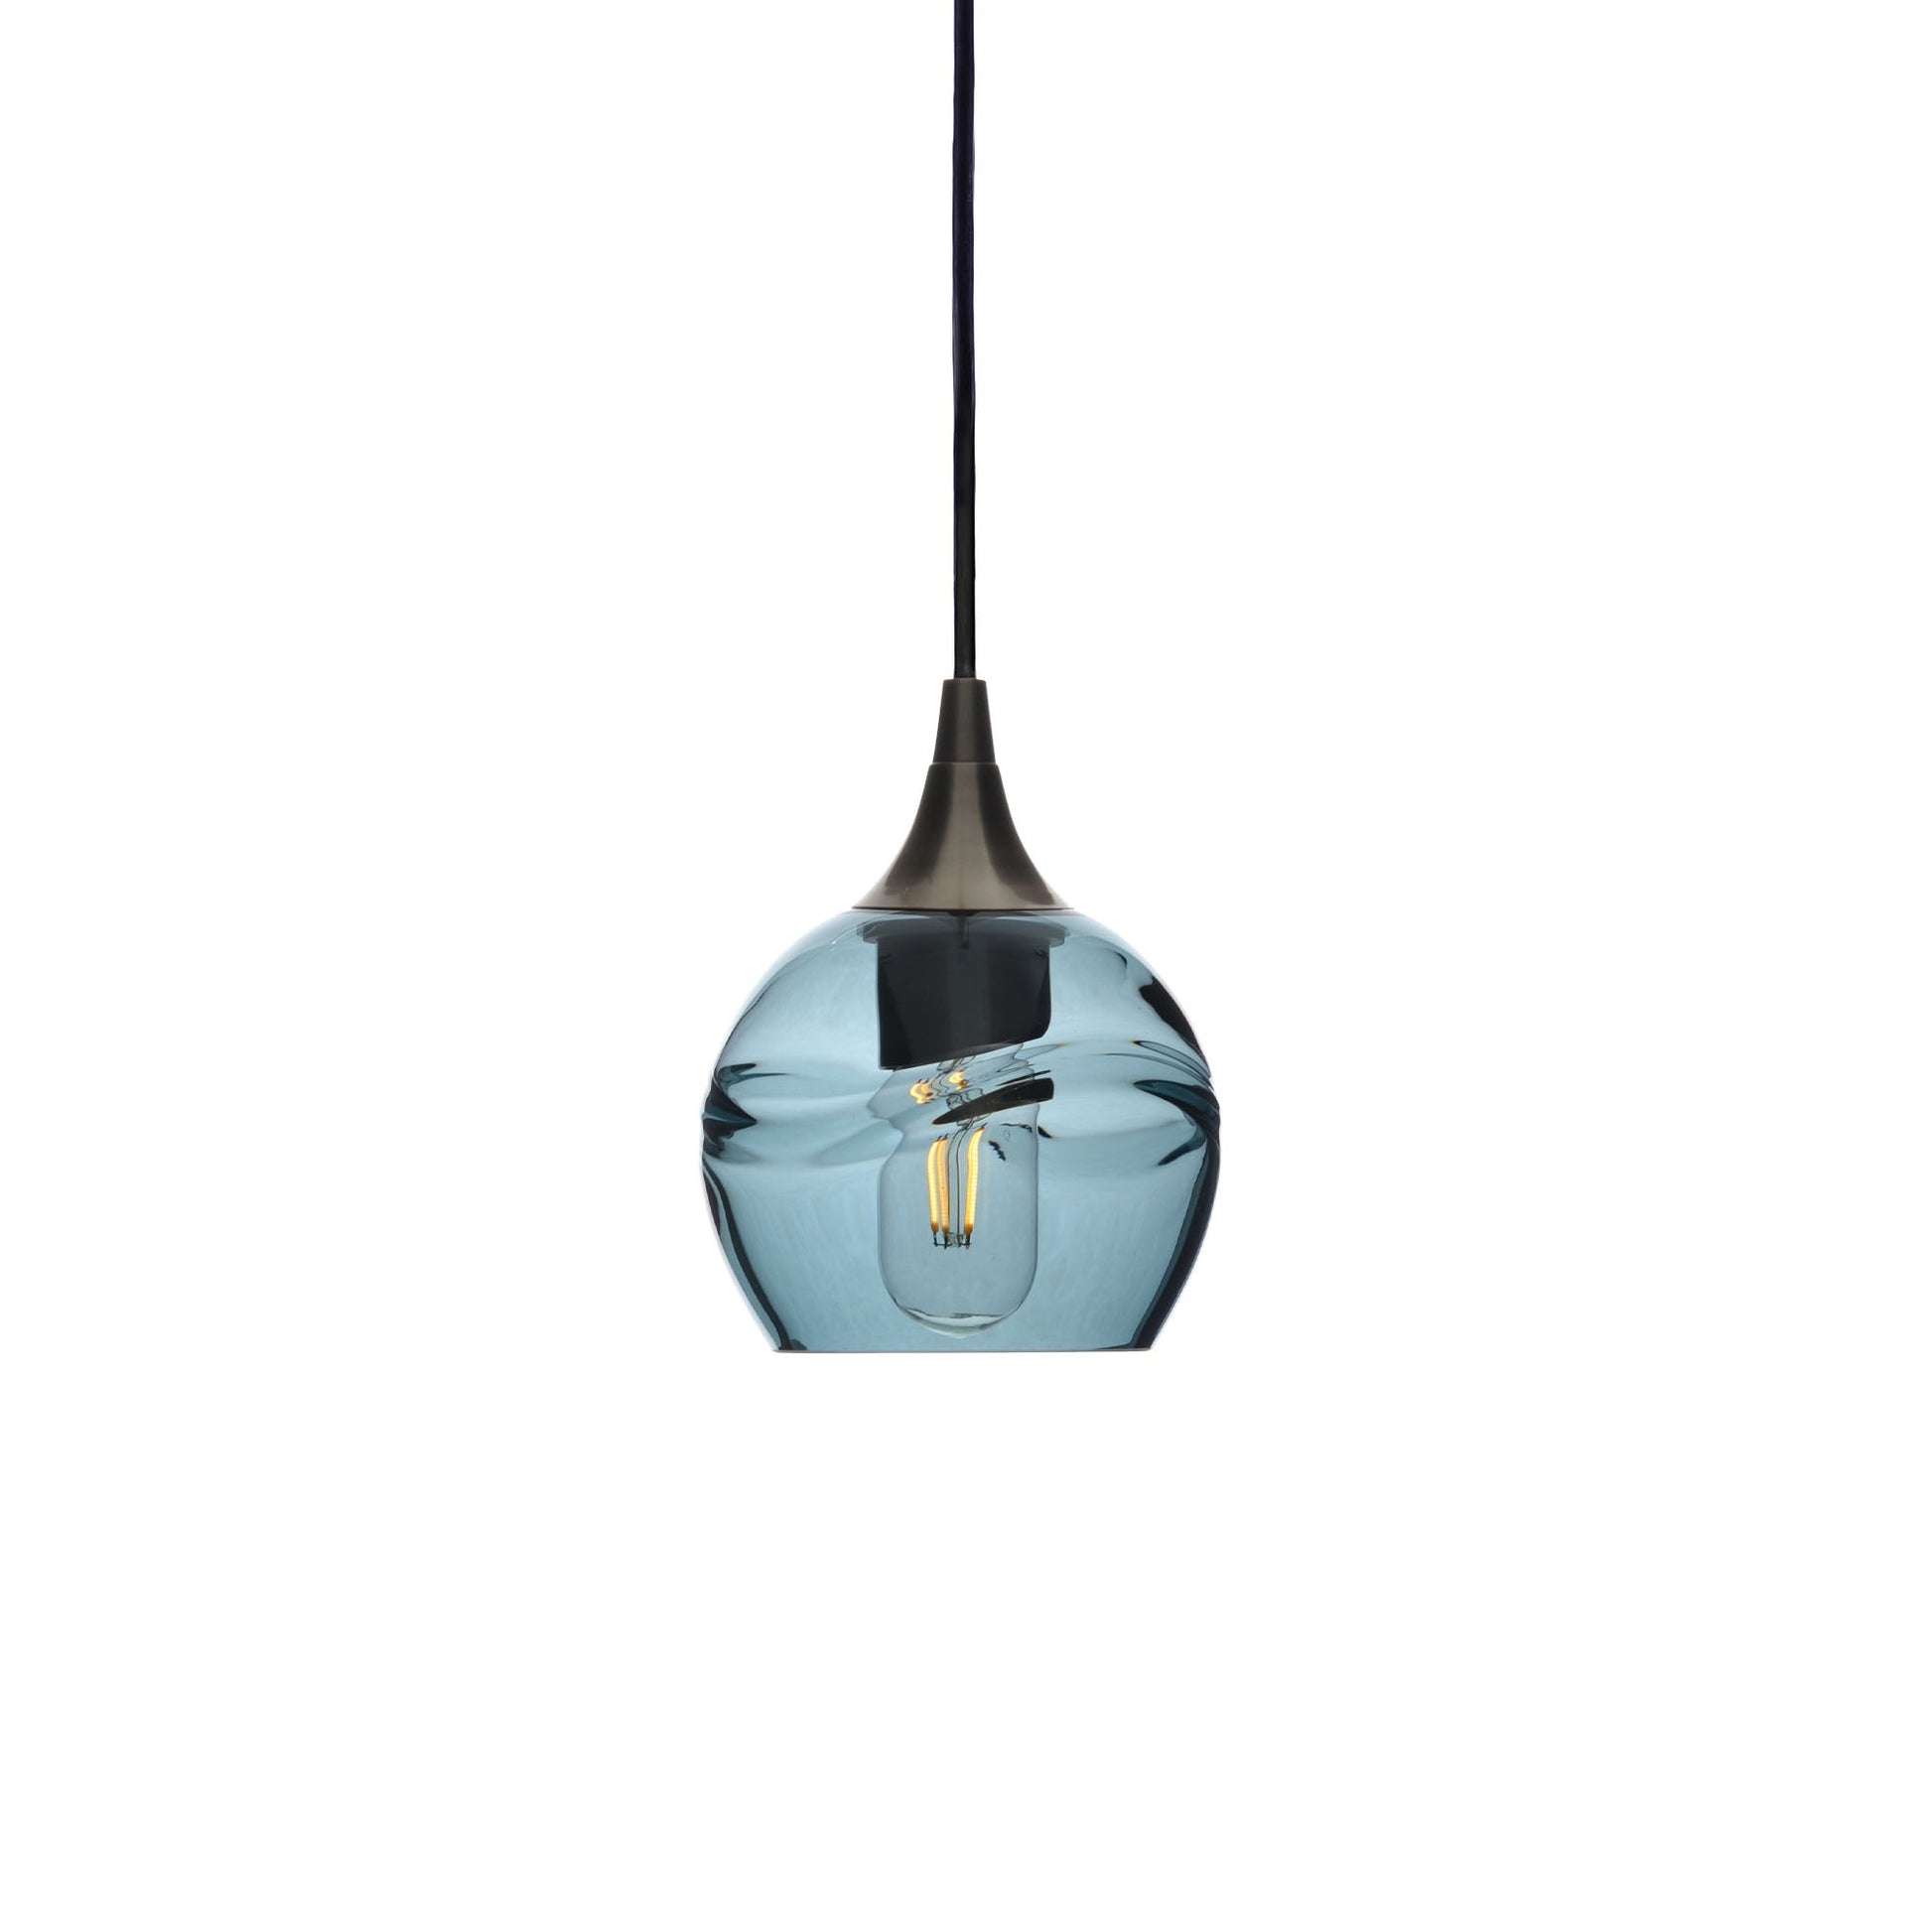 763 Swell: Single Pendant Light-Glass-Bicycle Glass Co - Hotshop-Slate Gray-Antique Bronze-Bicycle Glass Co